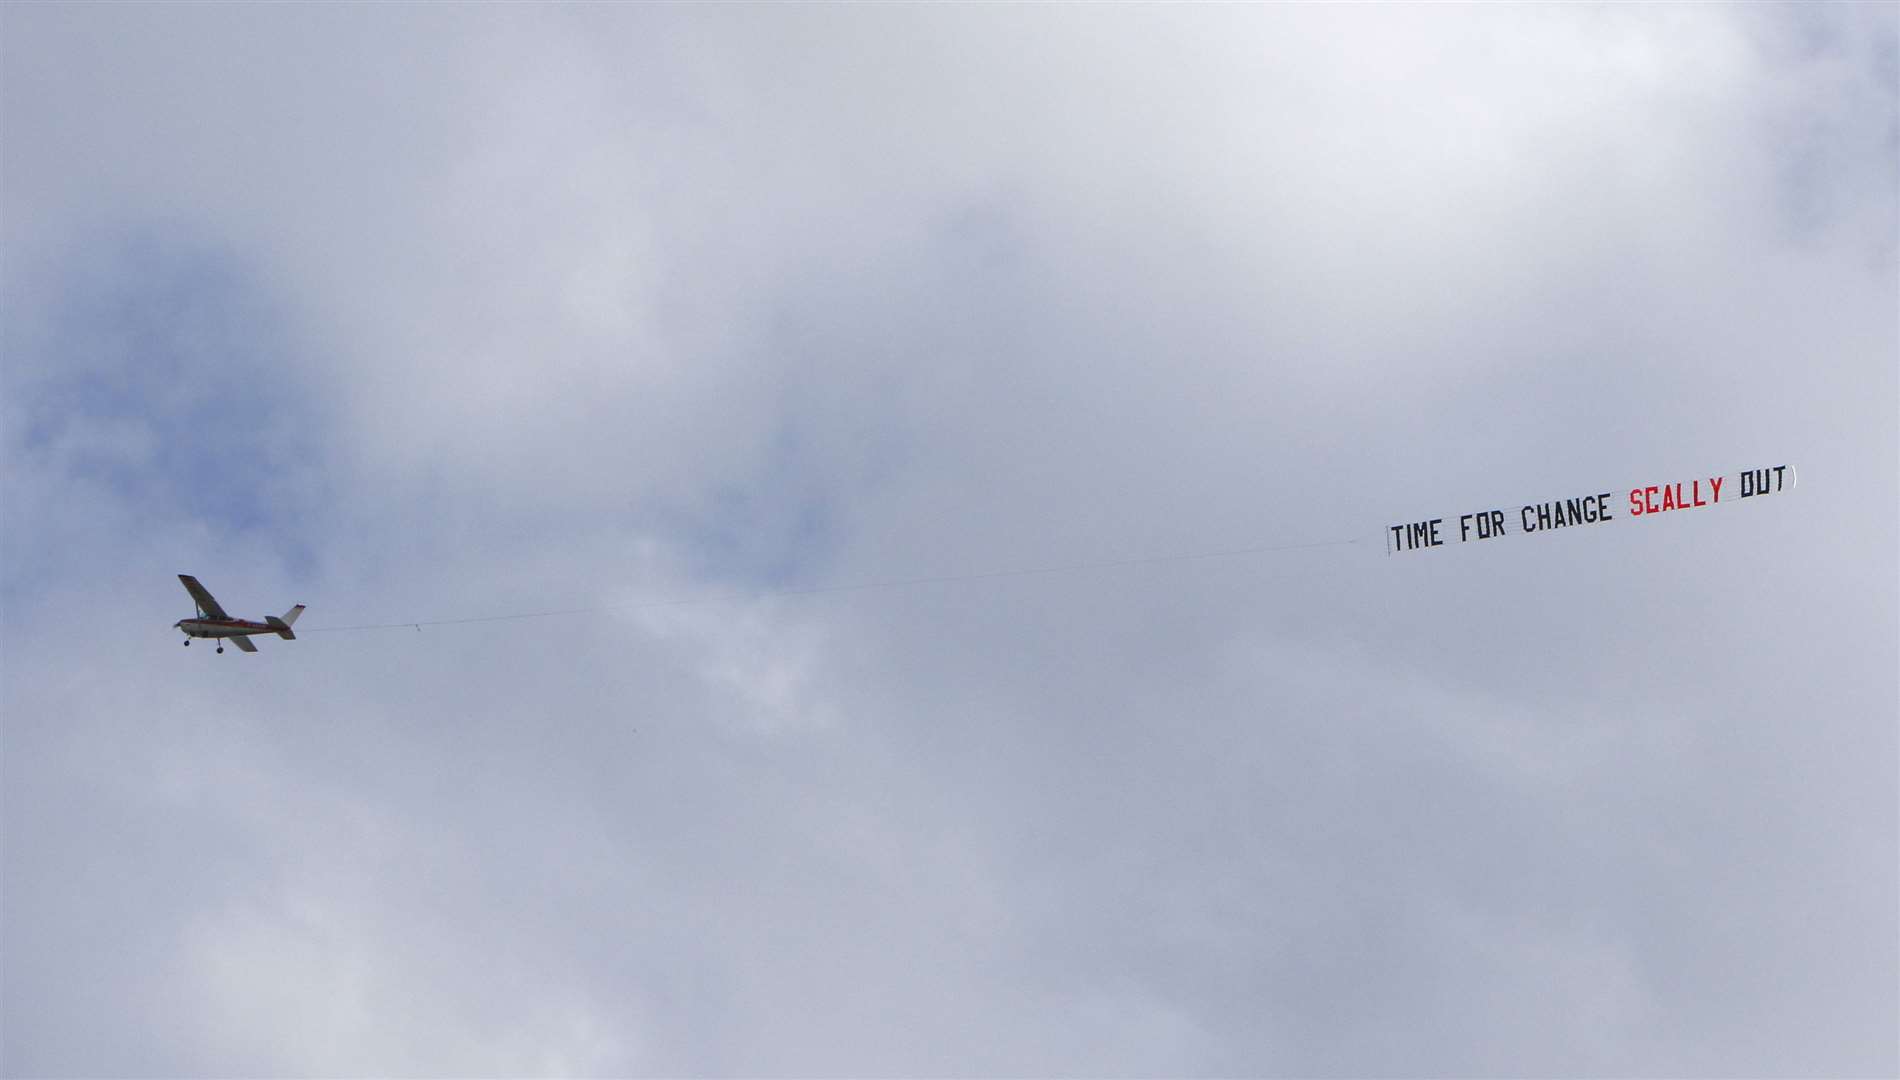 Those in favour of change at Gills took to the sky to make their point. Picture: Andy Jones